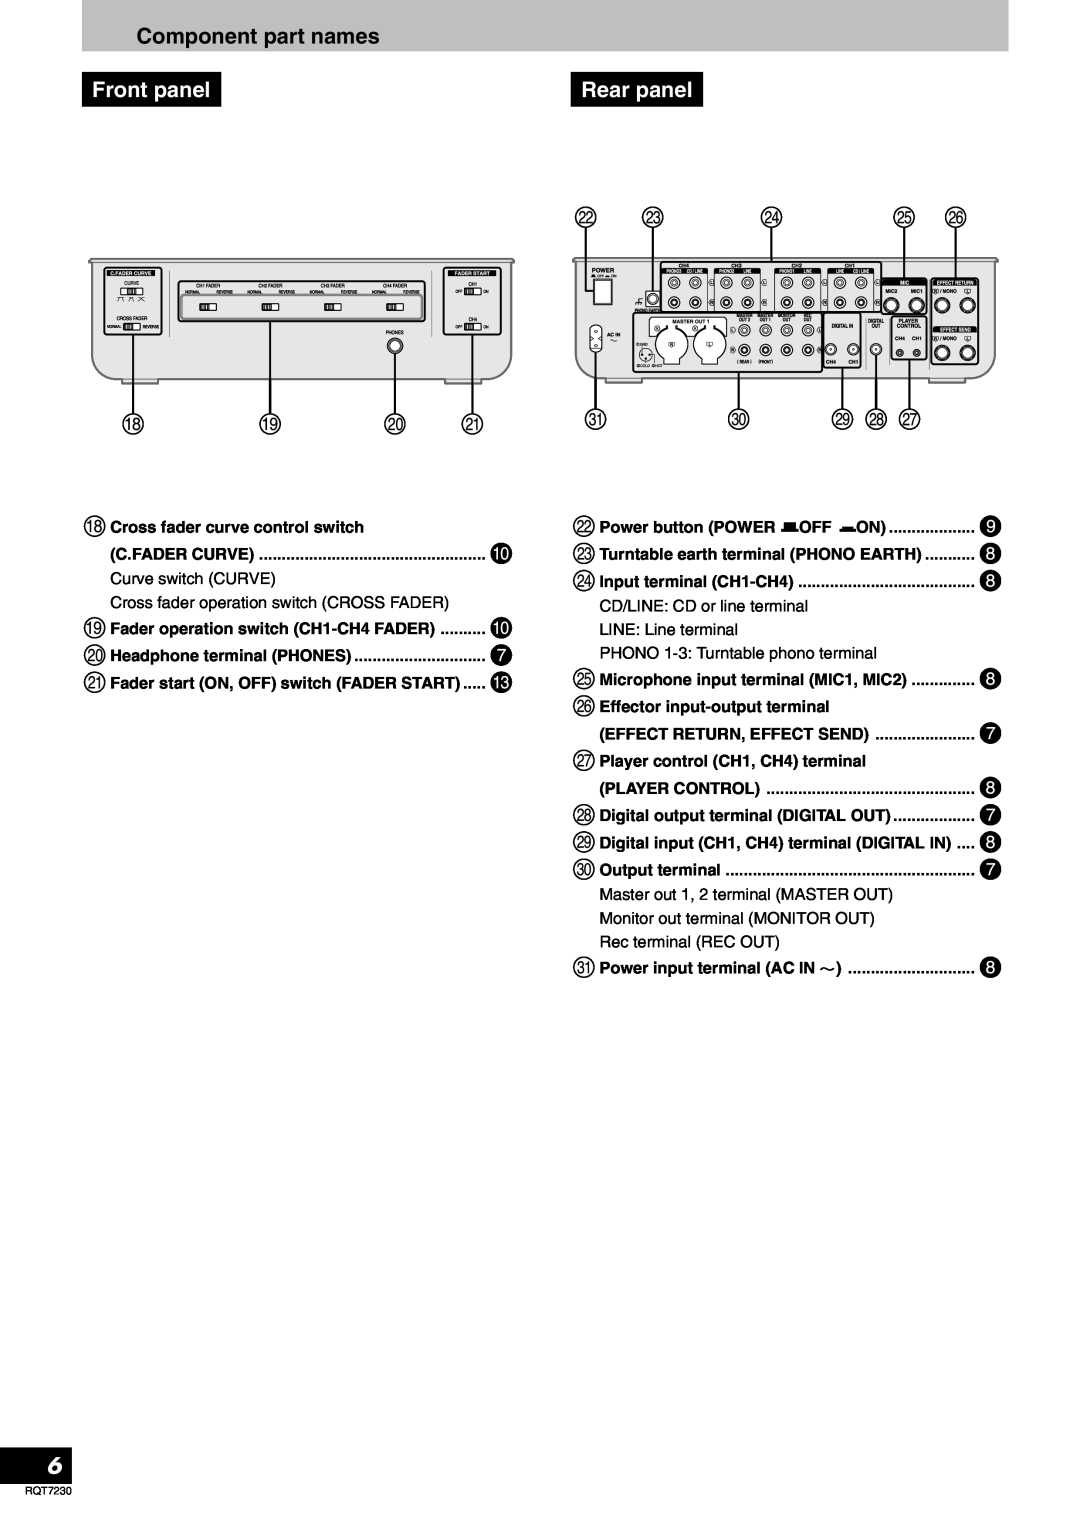 Panasonic RQT7230-3Y, SH-MZ1200 operating instructions Front panel, Rear panel, Component part names 